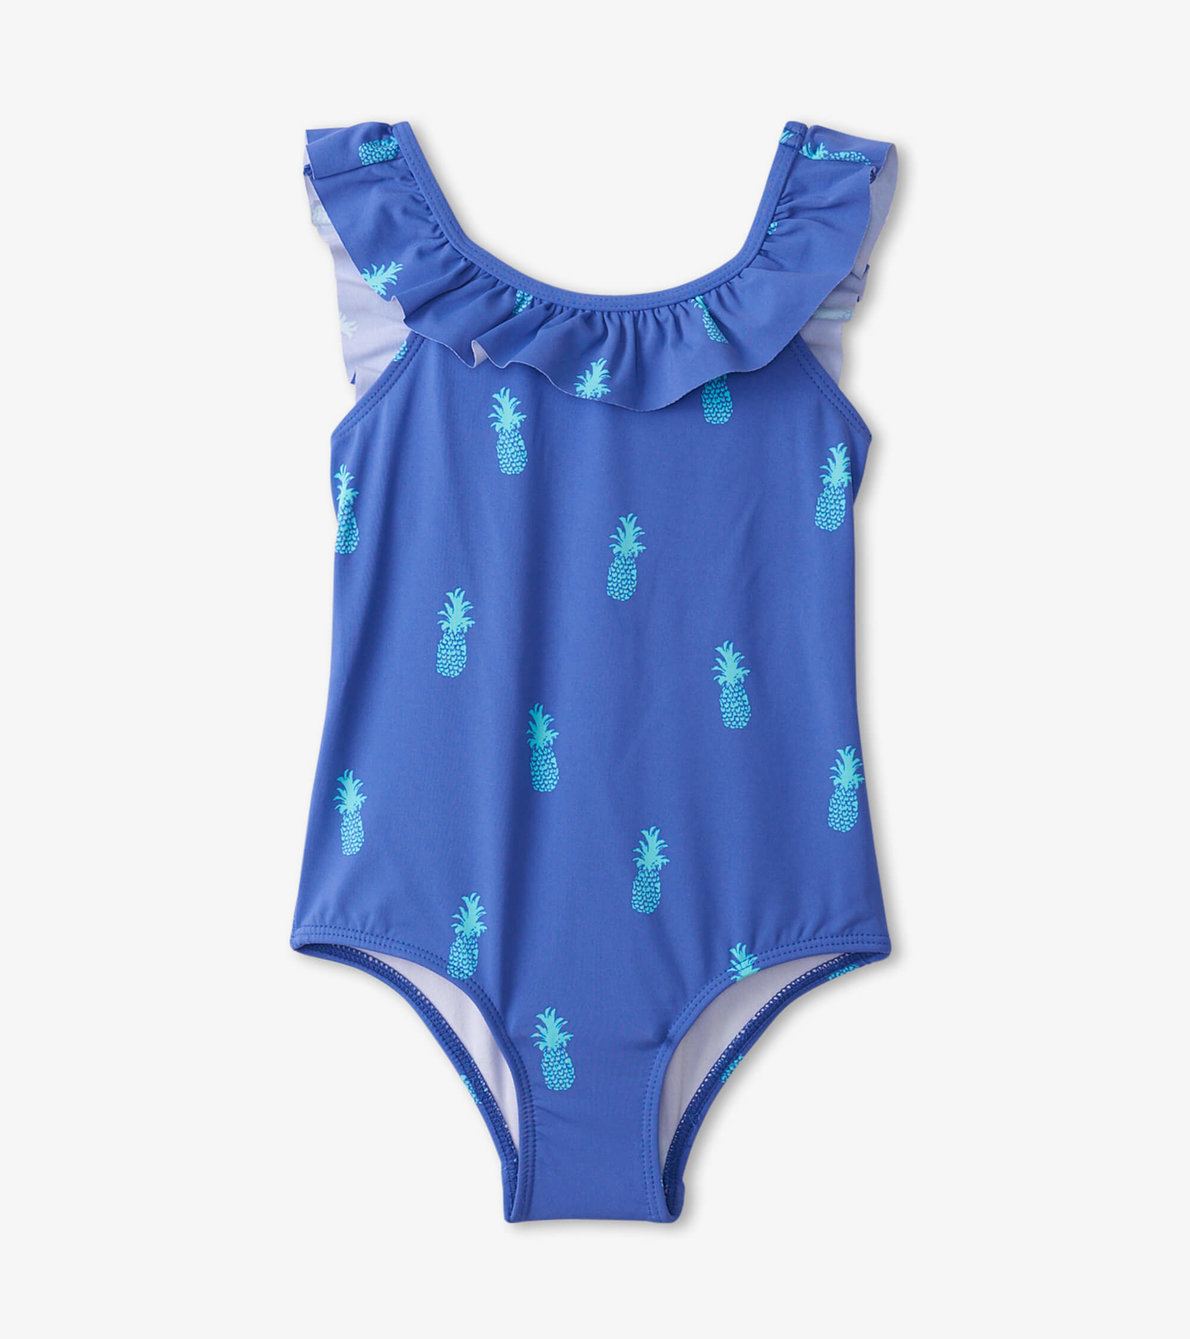 View larger image of Juicy Pineapples Ruffle Sleeve Swimsuit